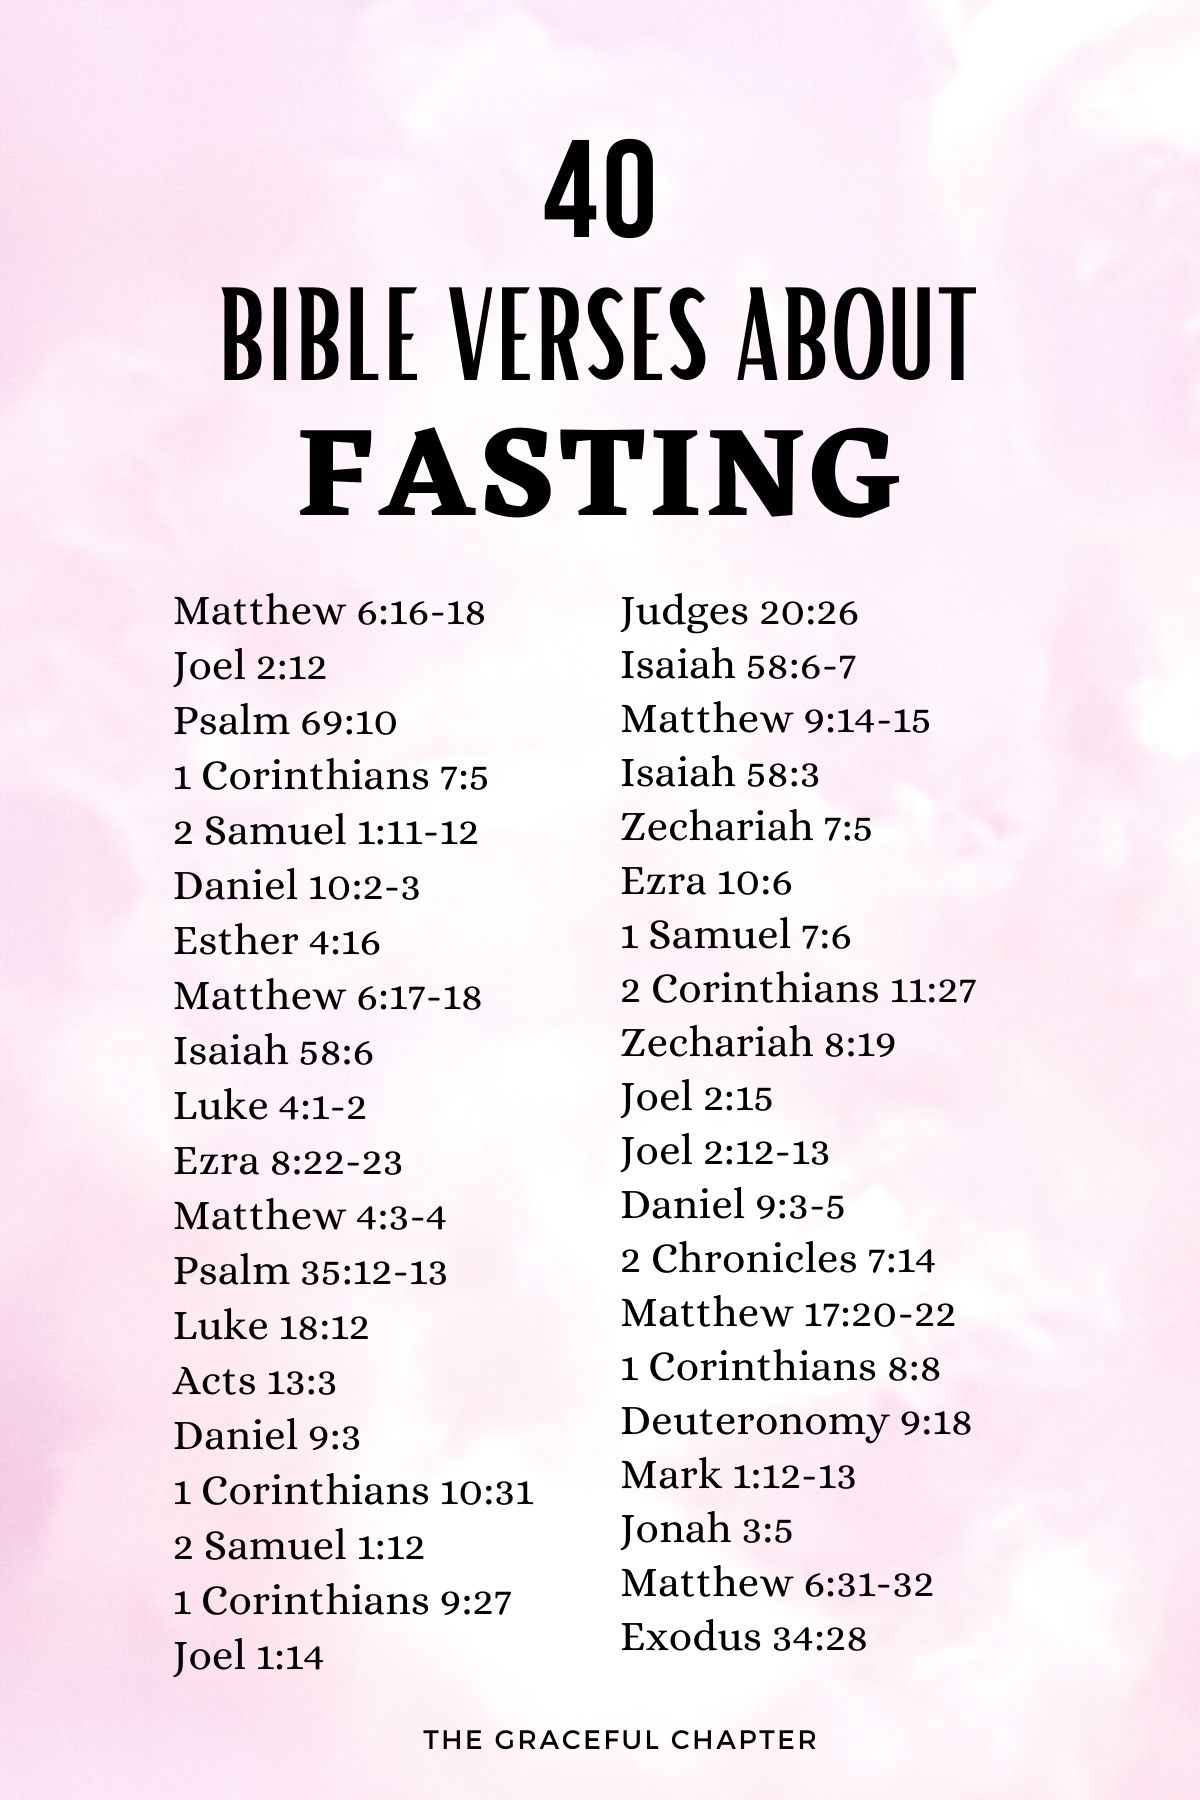 bible verses about fasting